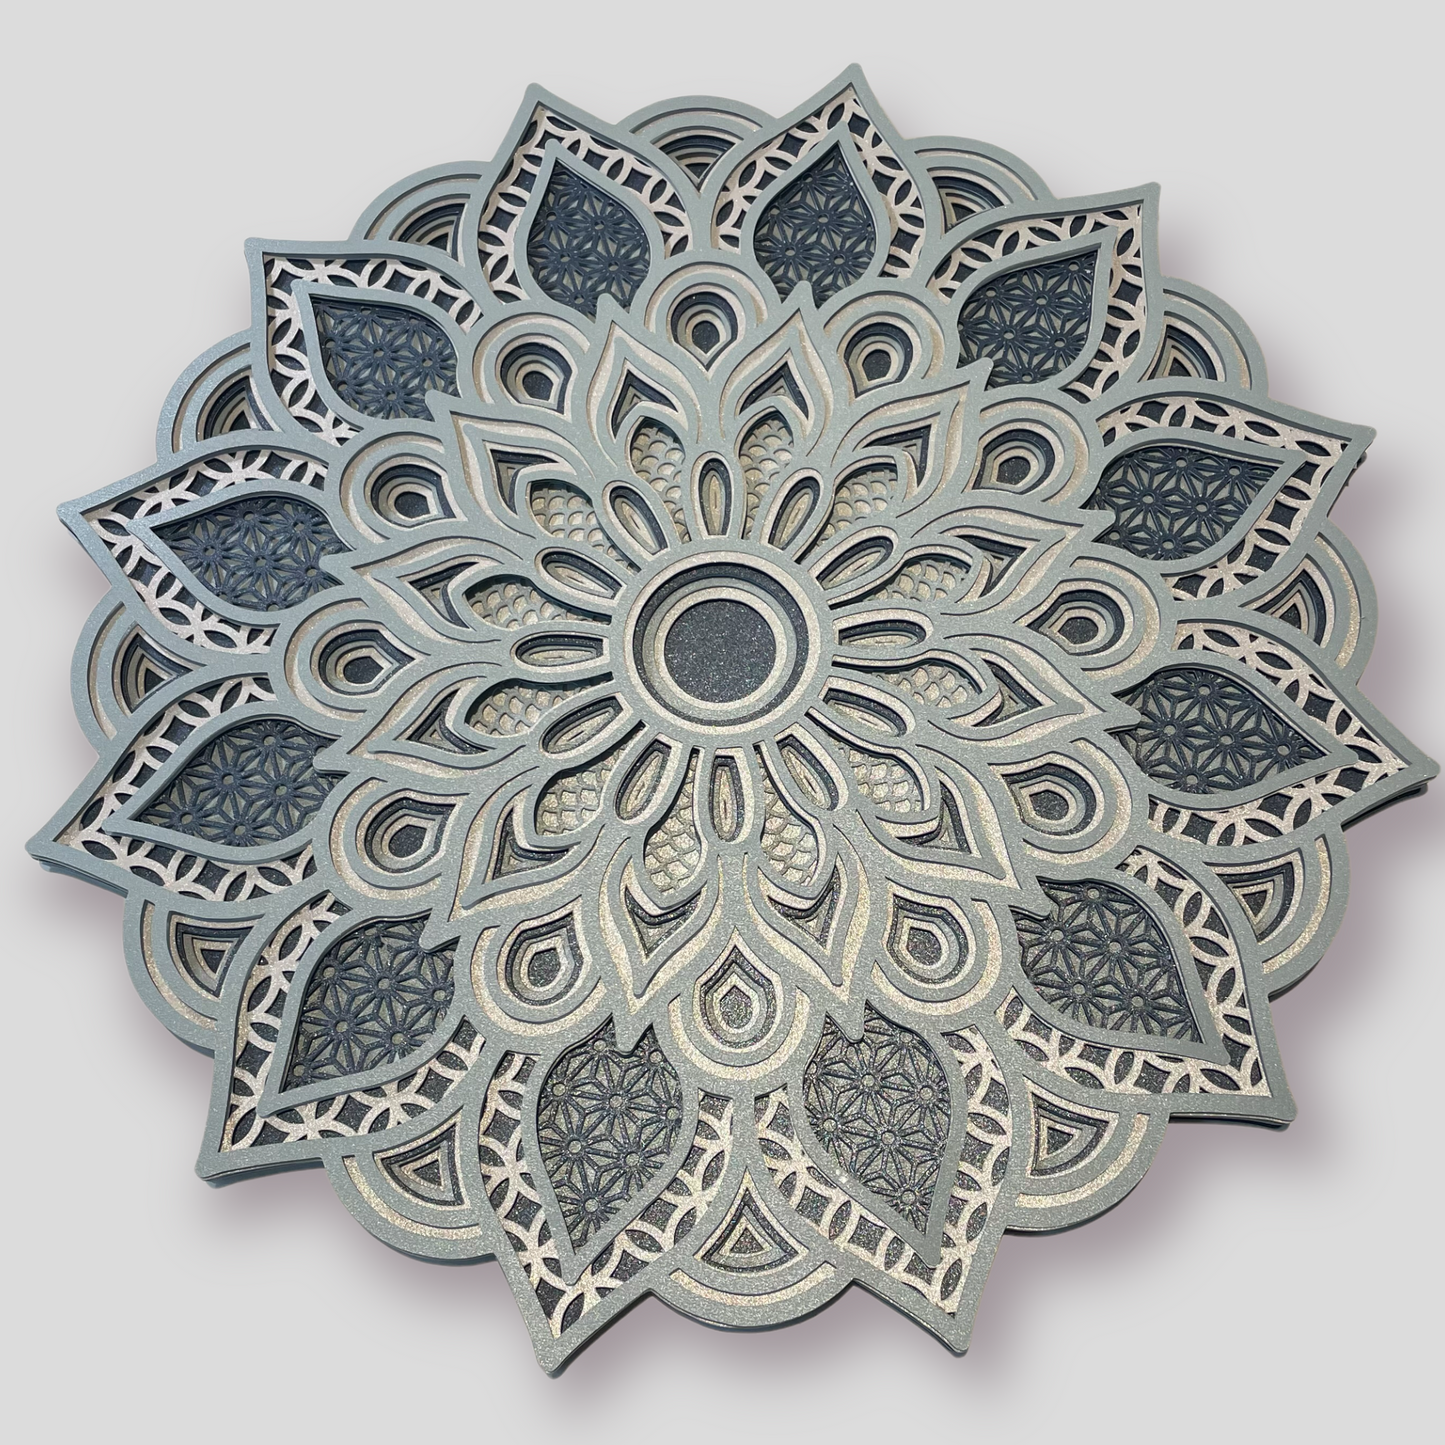 3d layered Mandala by Home Stitchery Decor.  This design has multiple layers and is sized for a 12 inch shadow box.  Grab your Cricut machine and take your crafting to the next level with this ultra intricate 3d layered Mandala designs.  Find your favorite at www.homestitcherydecor.com